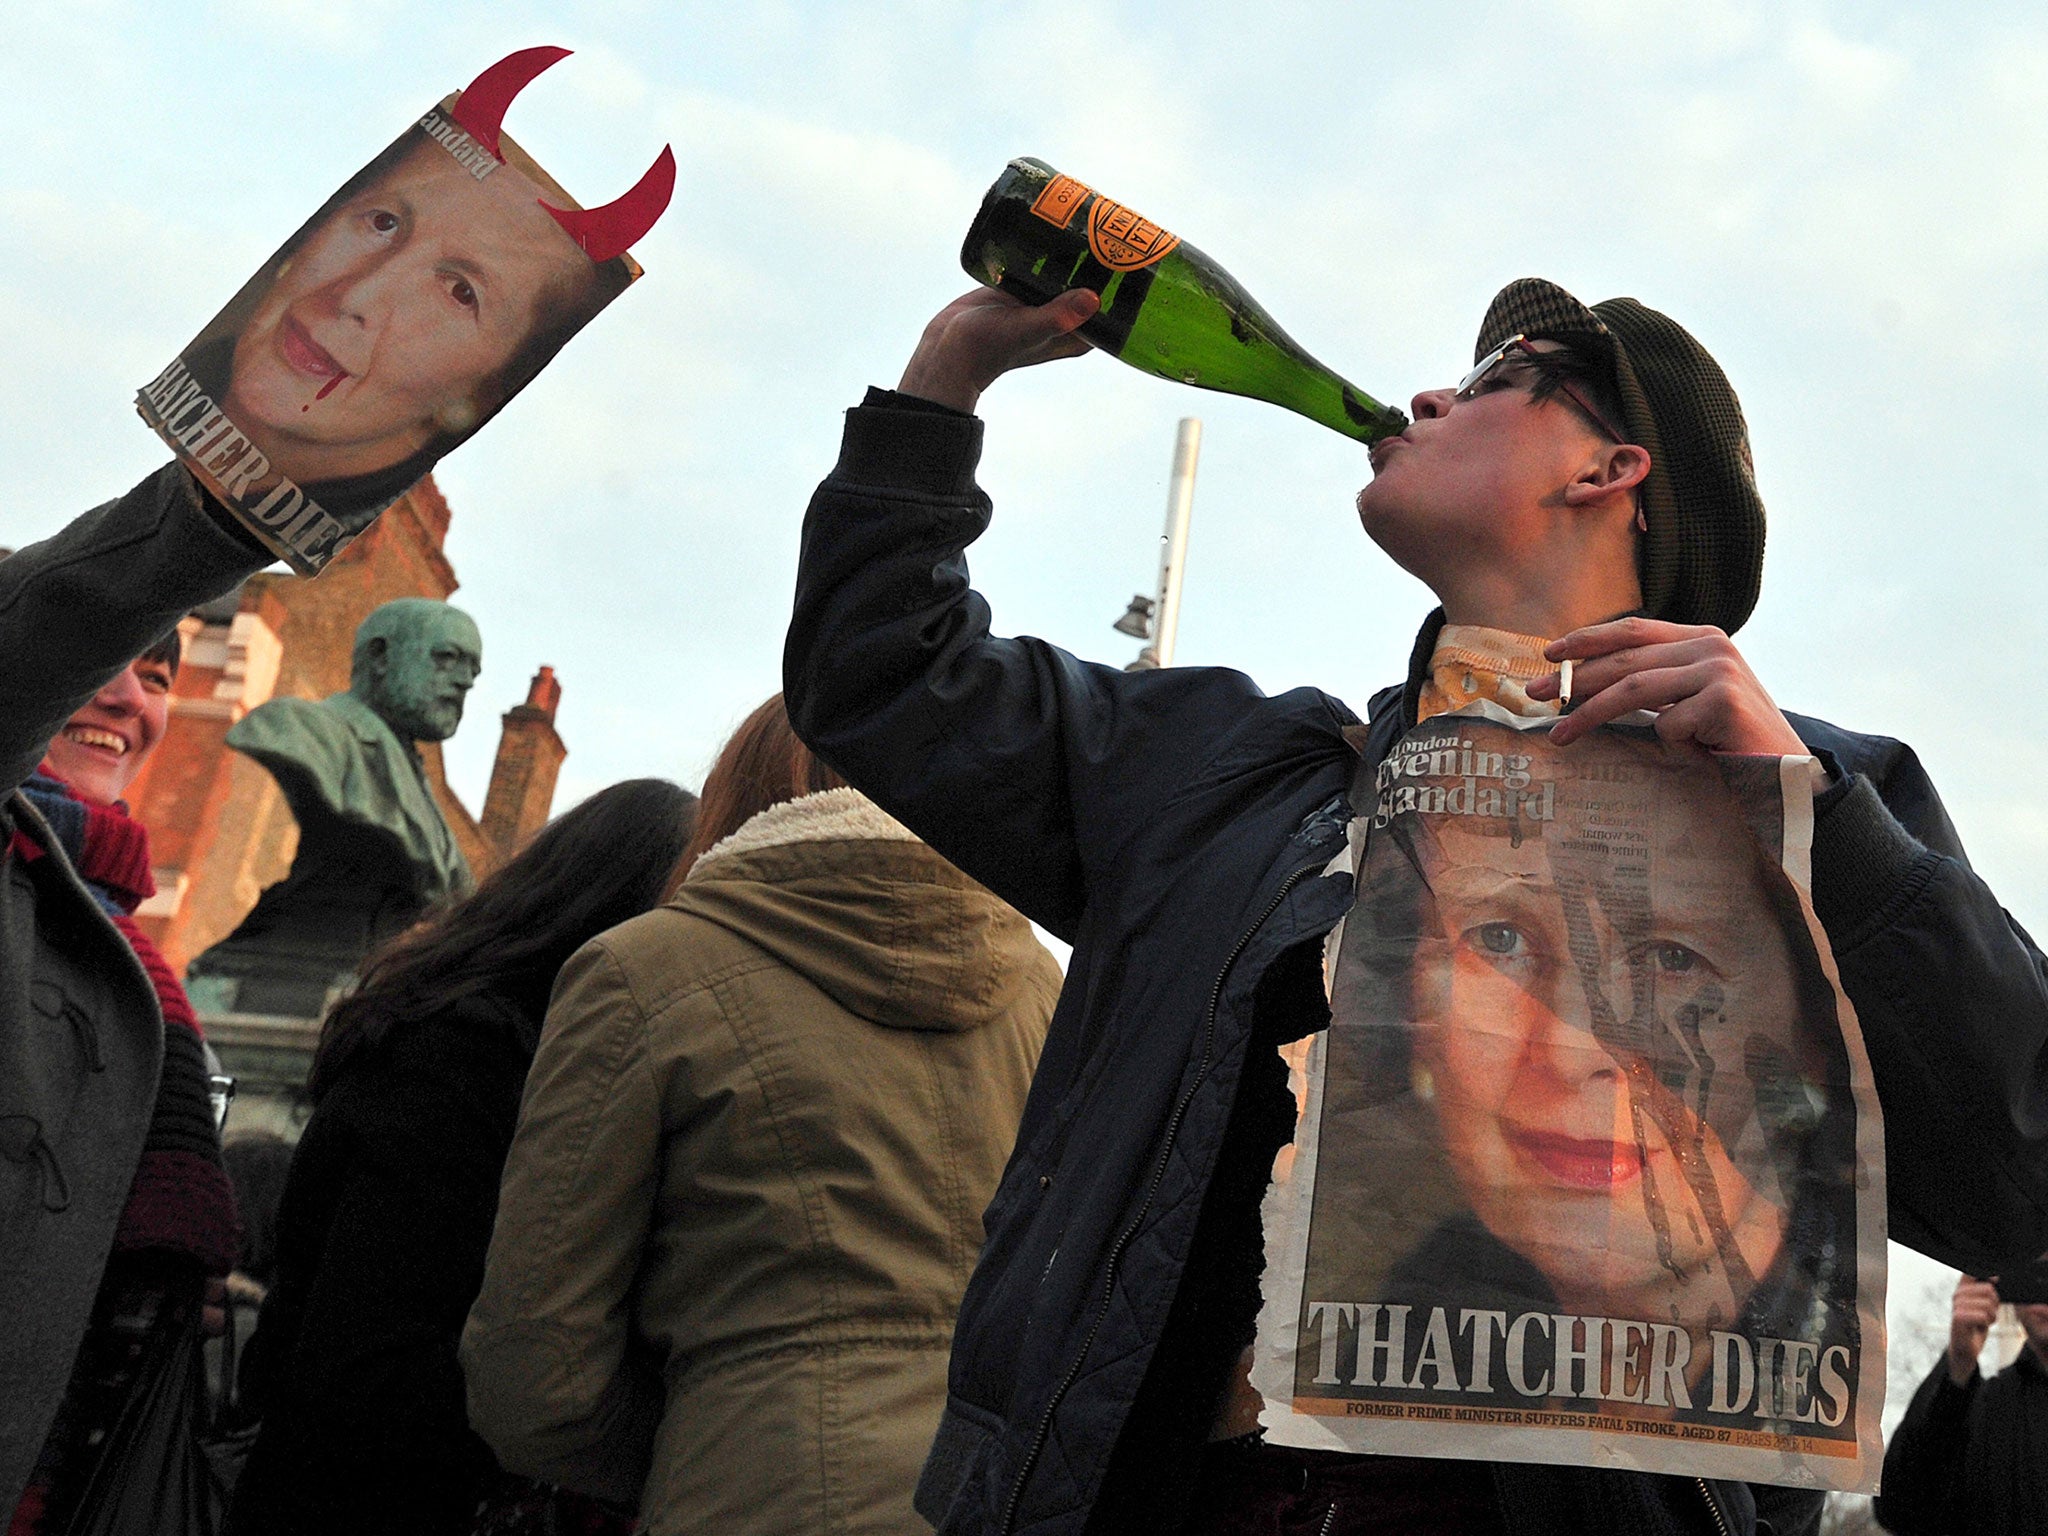 People gather during a 'party' to celebrate the death of former British Prime Minister Margaret Thatcher in London